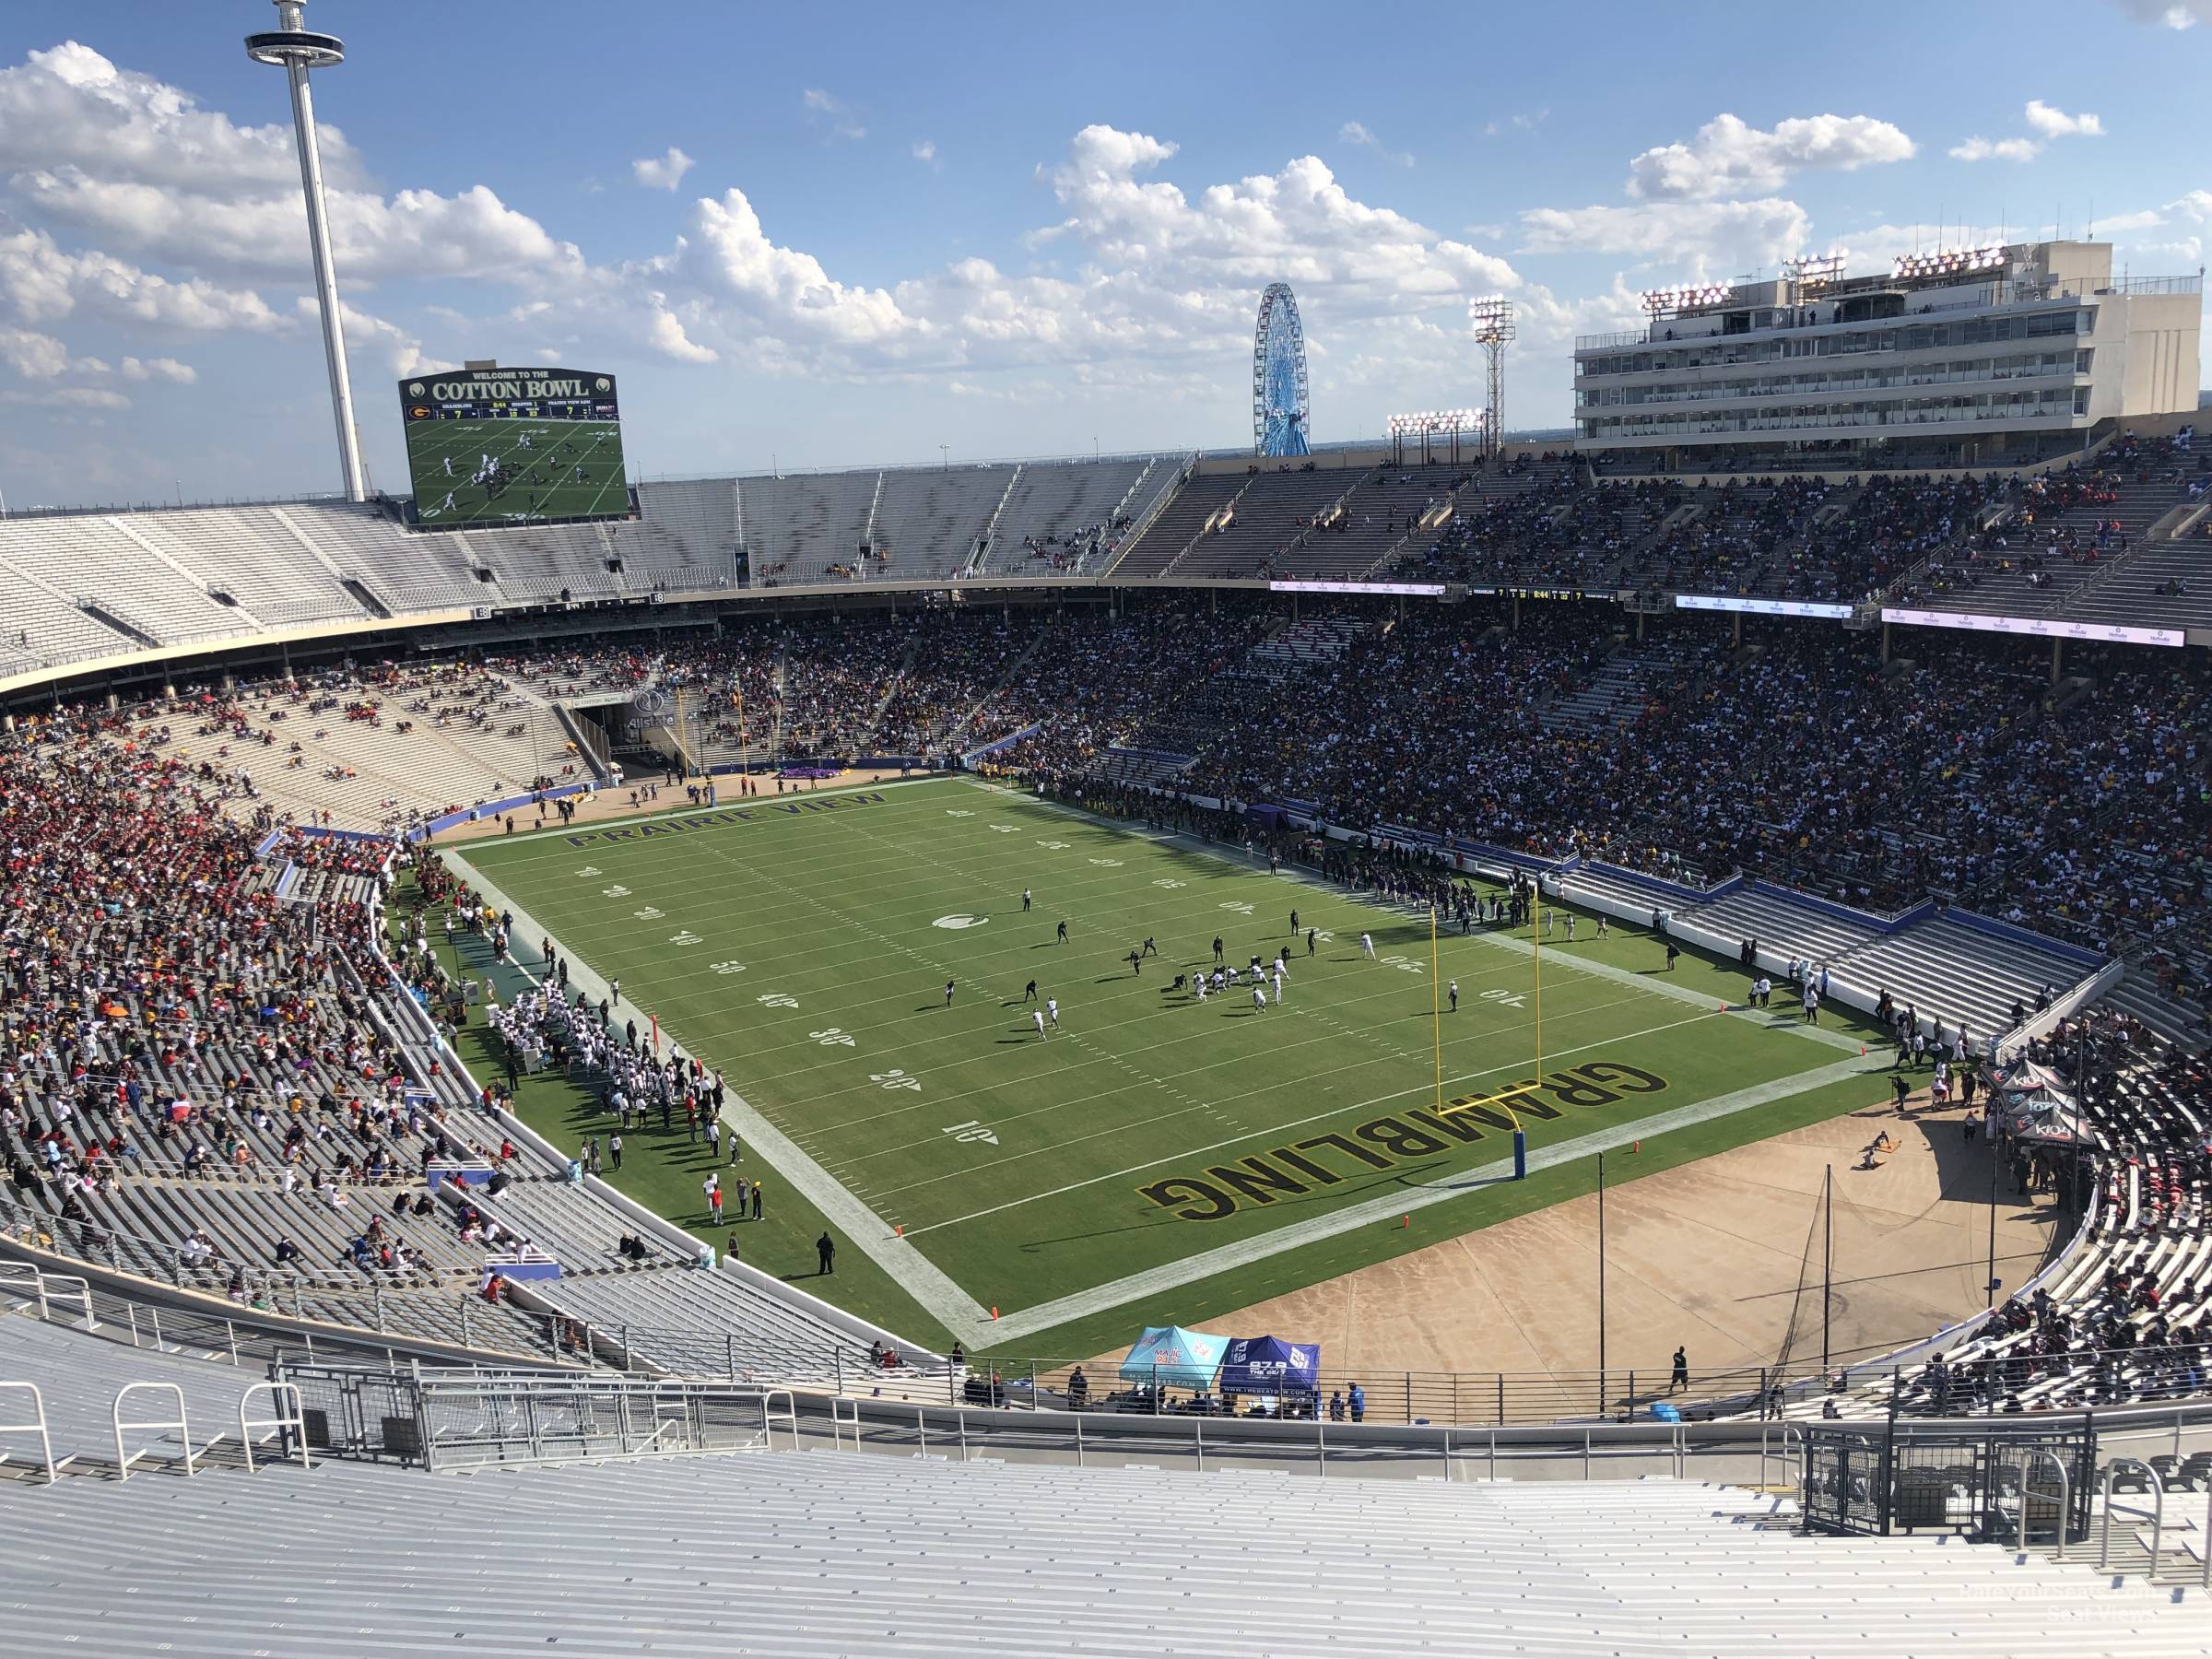 section 120, row 34 seat view  - cotton bowl